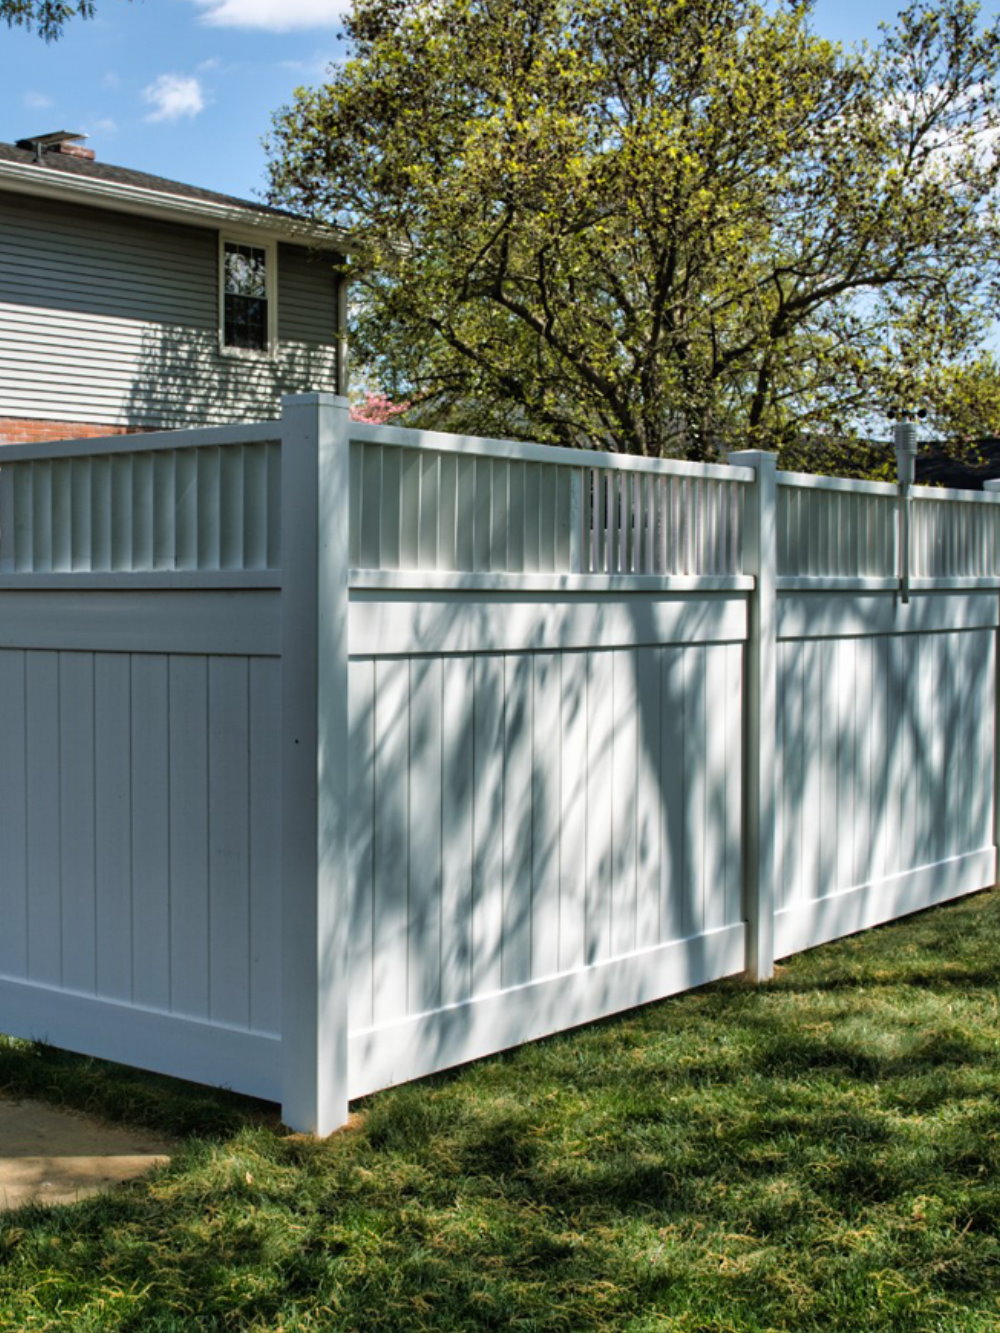 Types of fences we install in Carmi IL